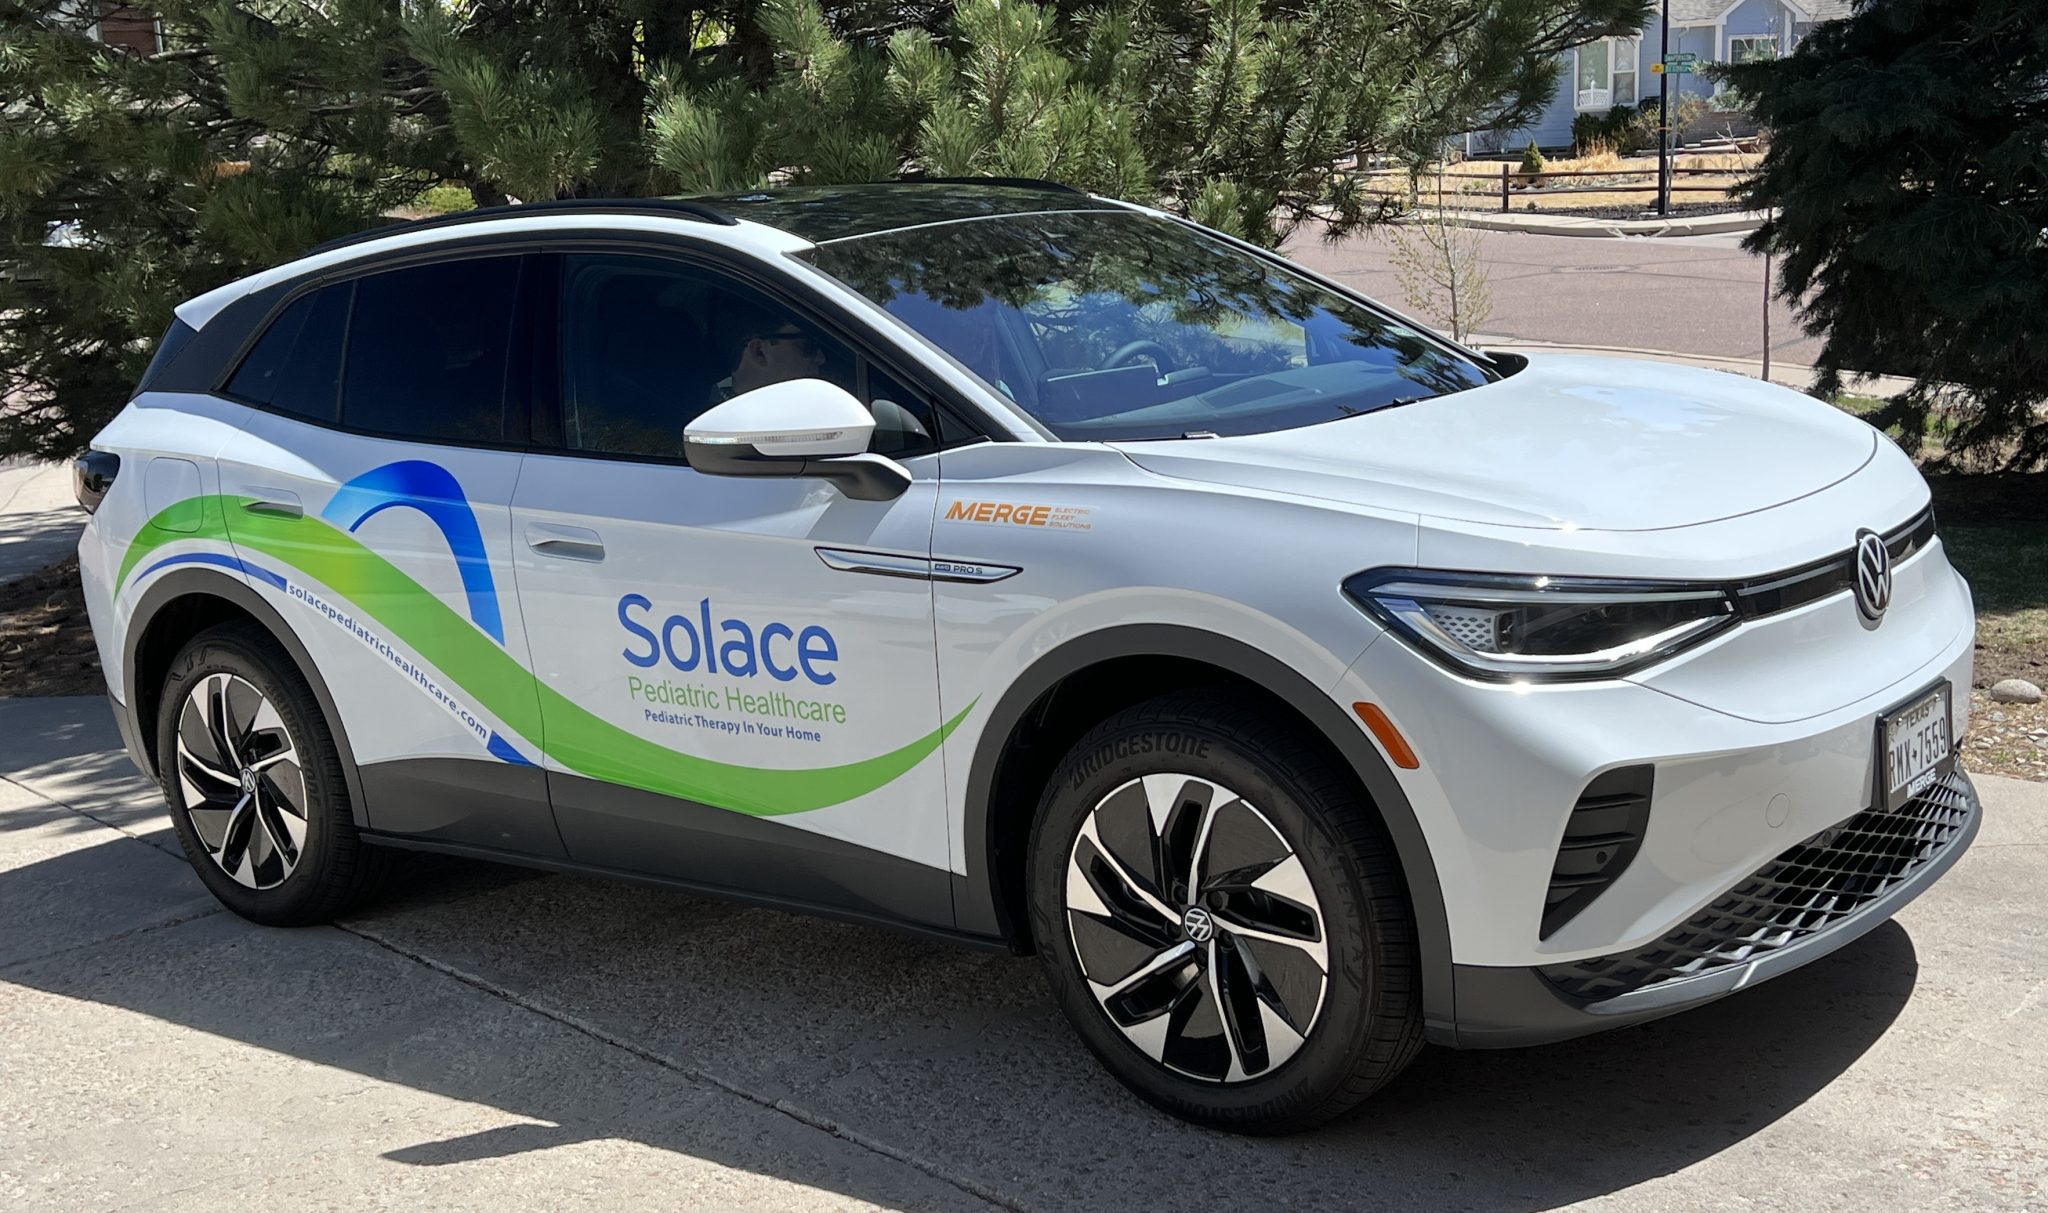 Featured image for “Solace Pediatric Healthcare Partners With Merge Electric Fleet Solutions”